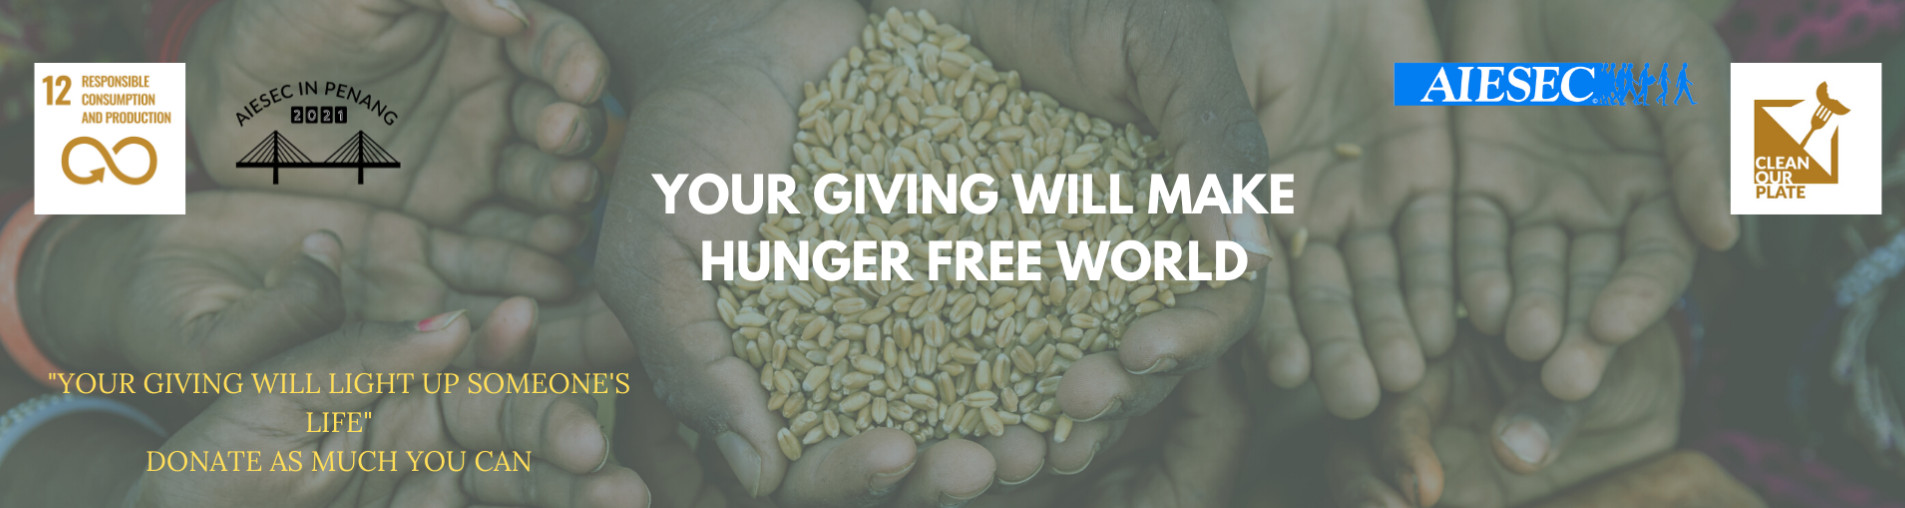 YOUR GIVING WILL MAKE HUNGER FREE WORLD